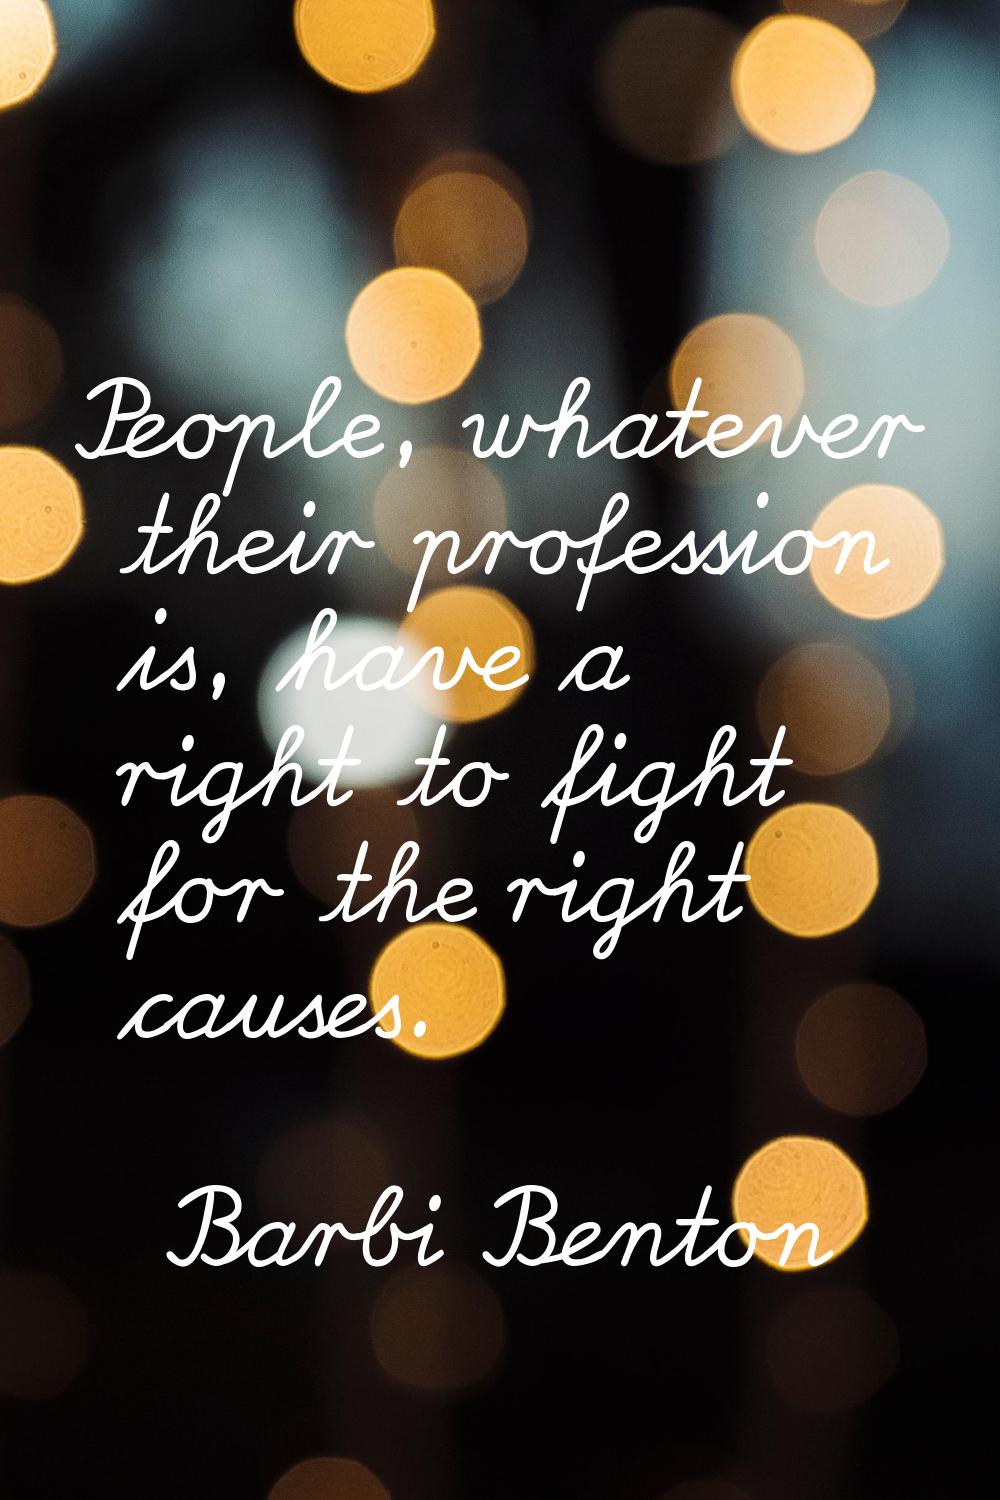 People, whatever their profession is, have a right to fight for the right causes.